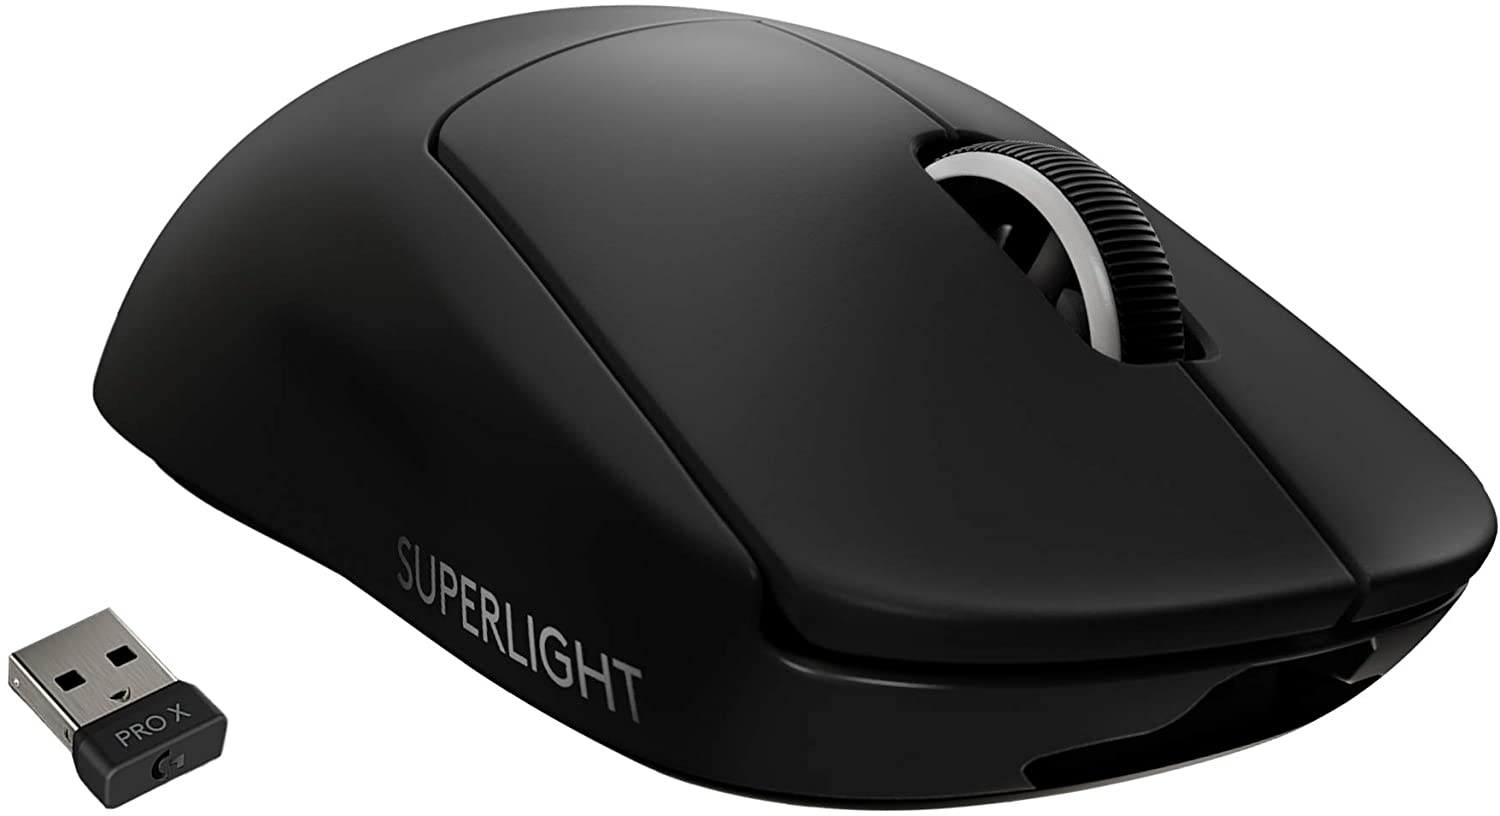 Logitech G PRO X Superlight Wireless Gaming Mouse Black - $142.98 (In Stock April 16)